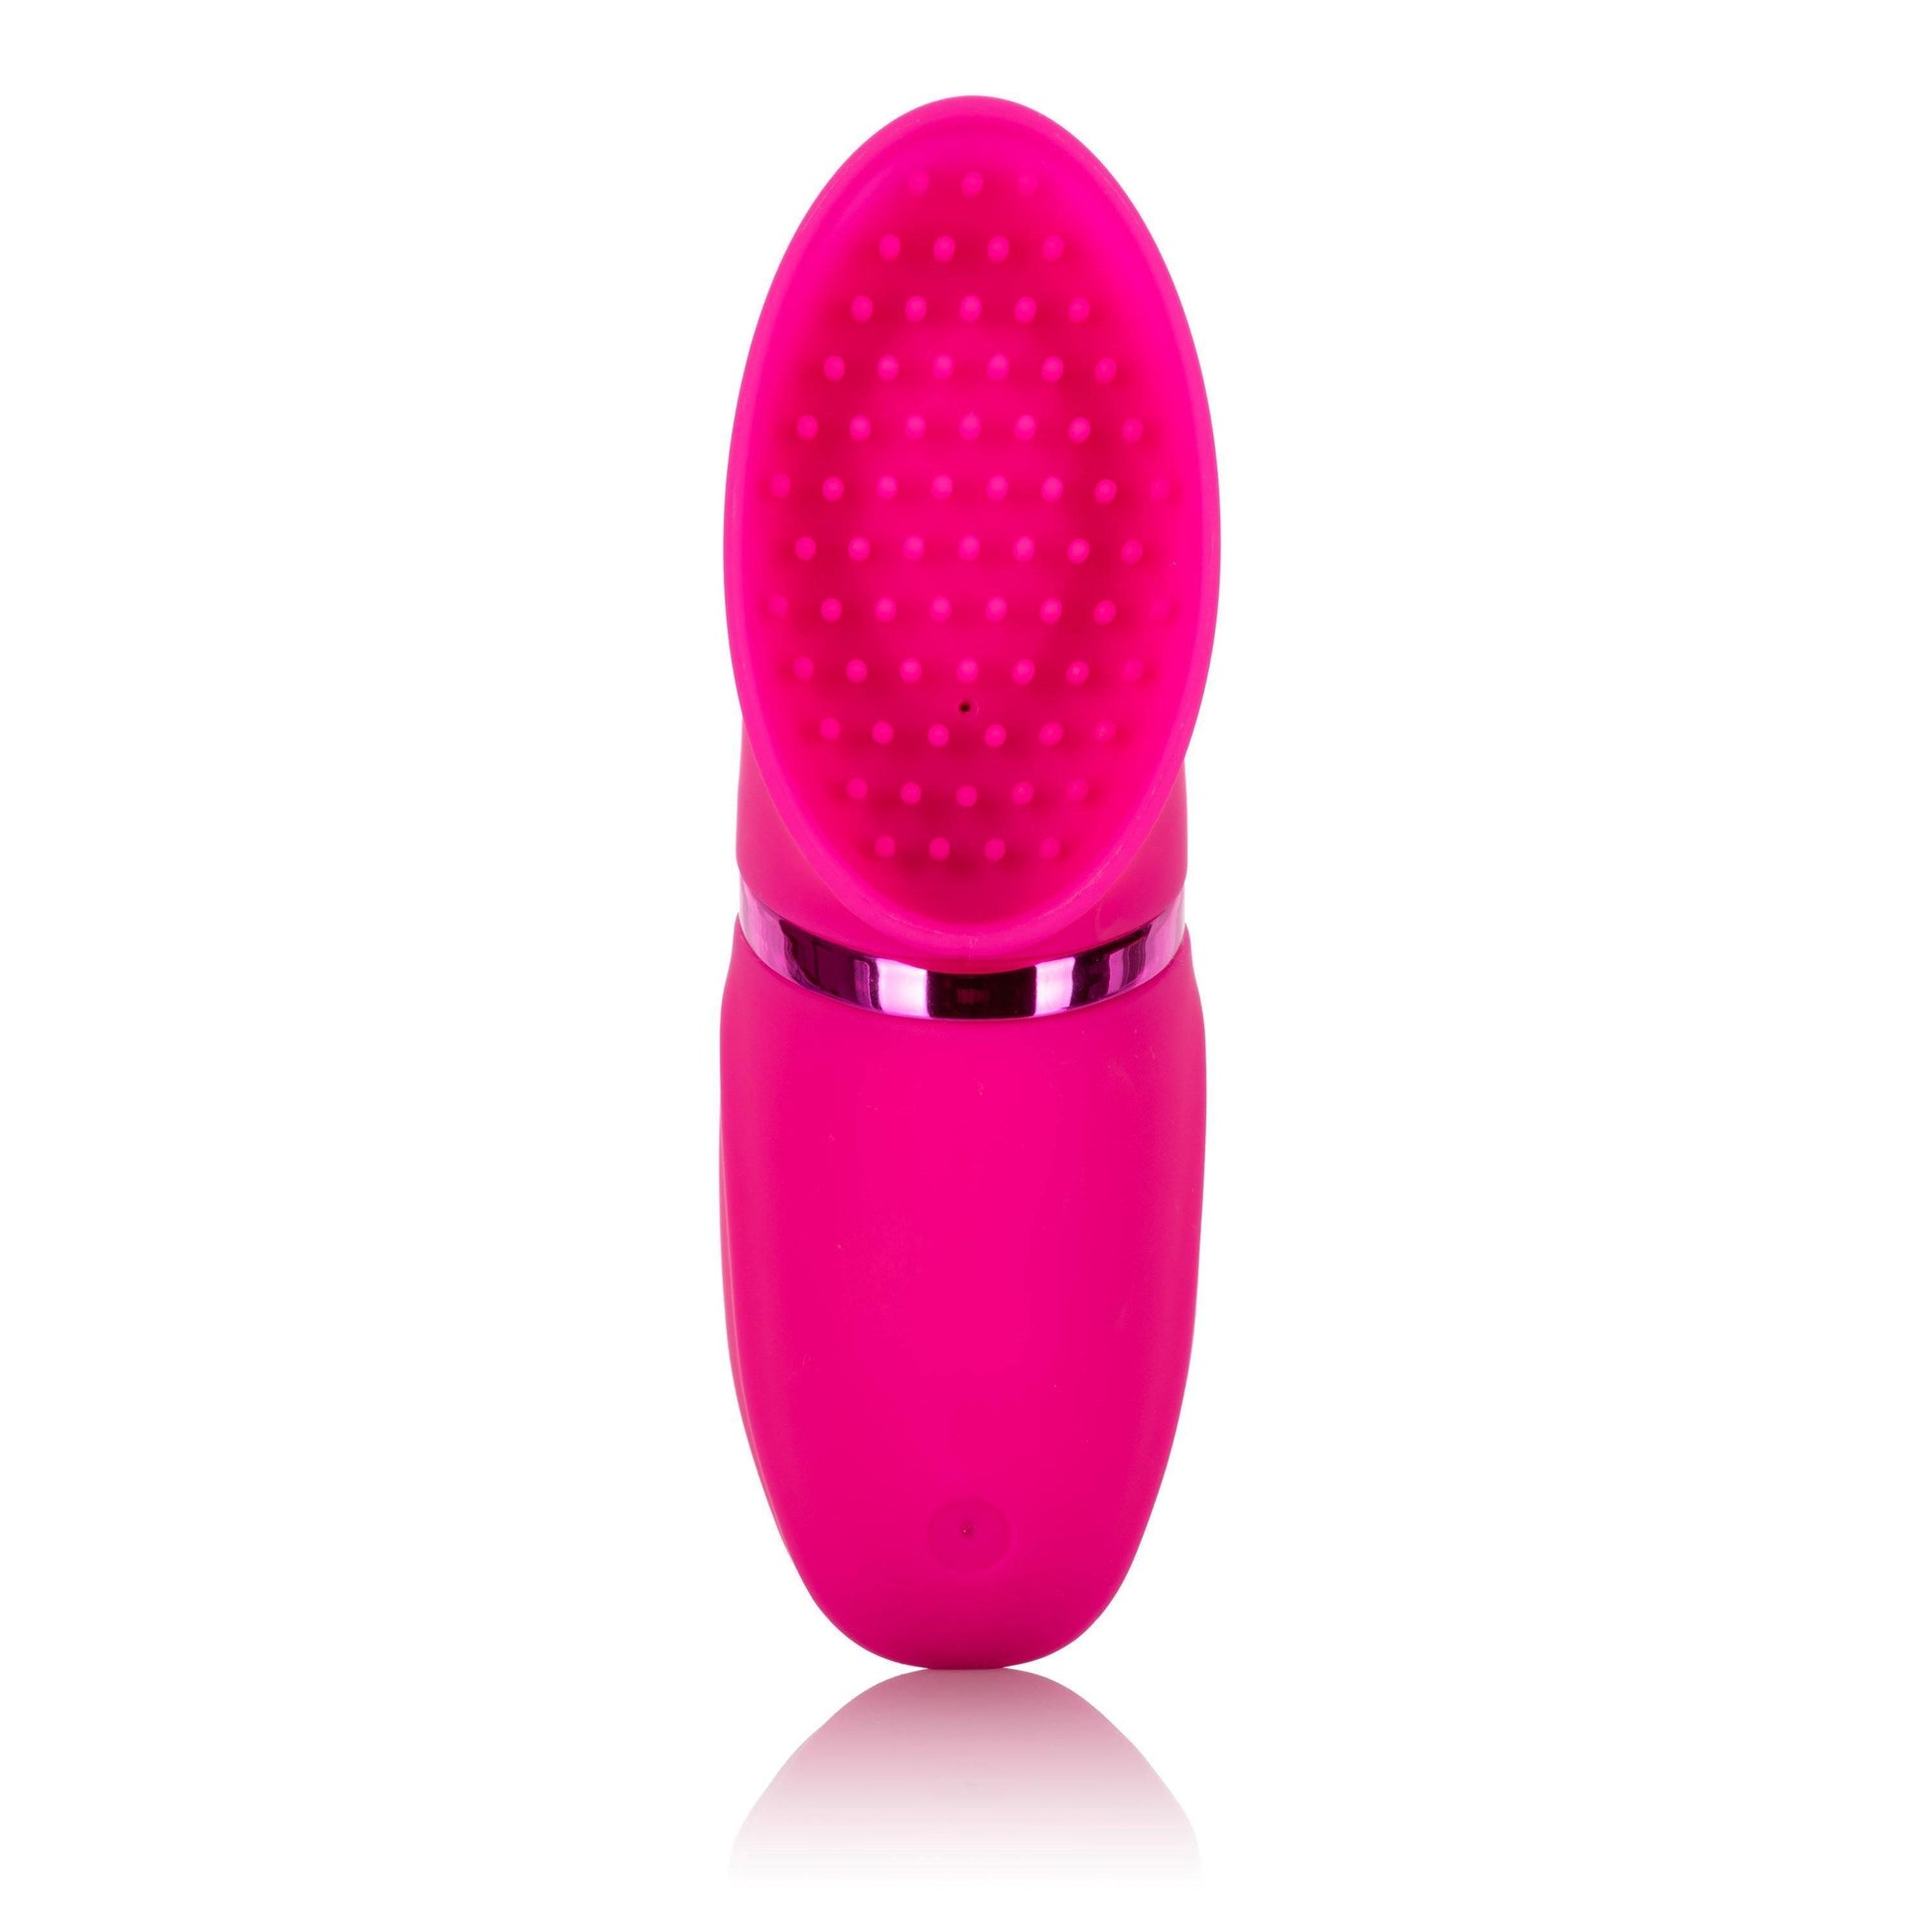 Intimate Pump Rechargeable Full Coverage Pump - My Sex Toy Hub